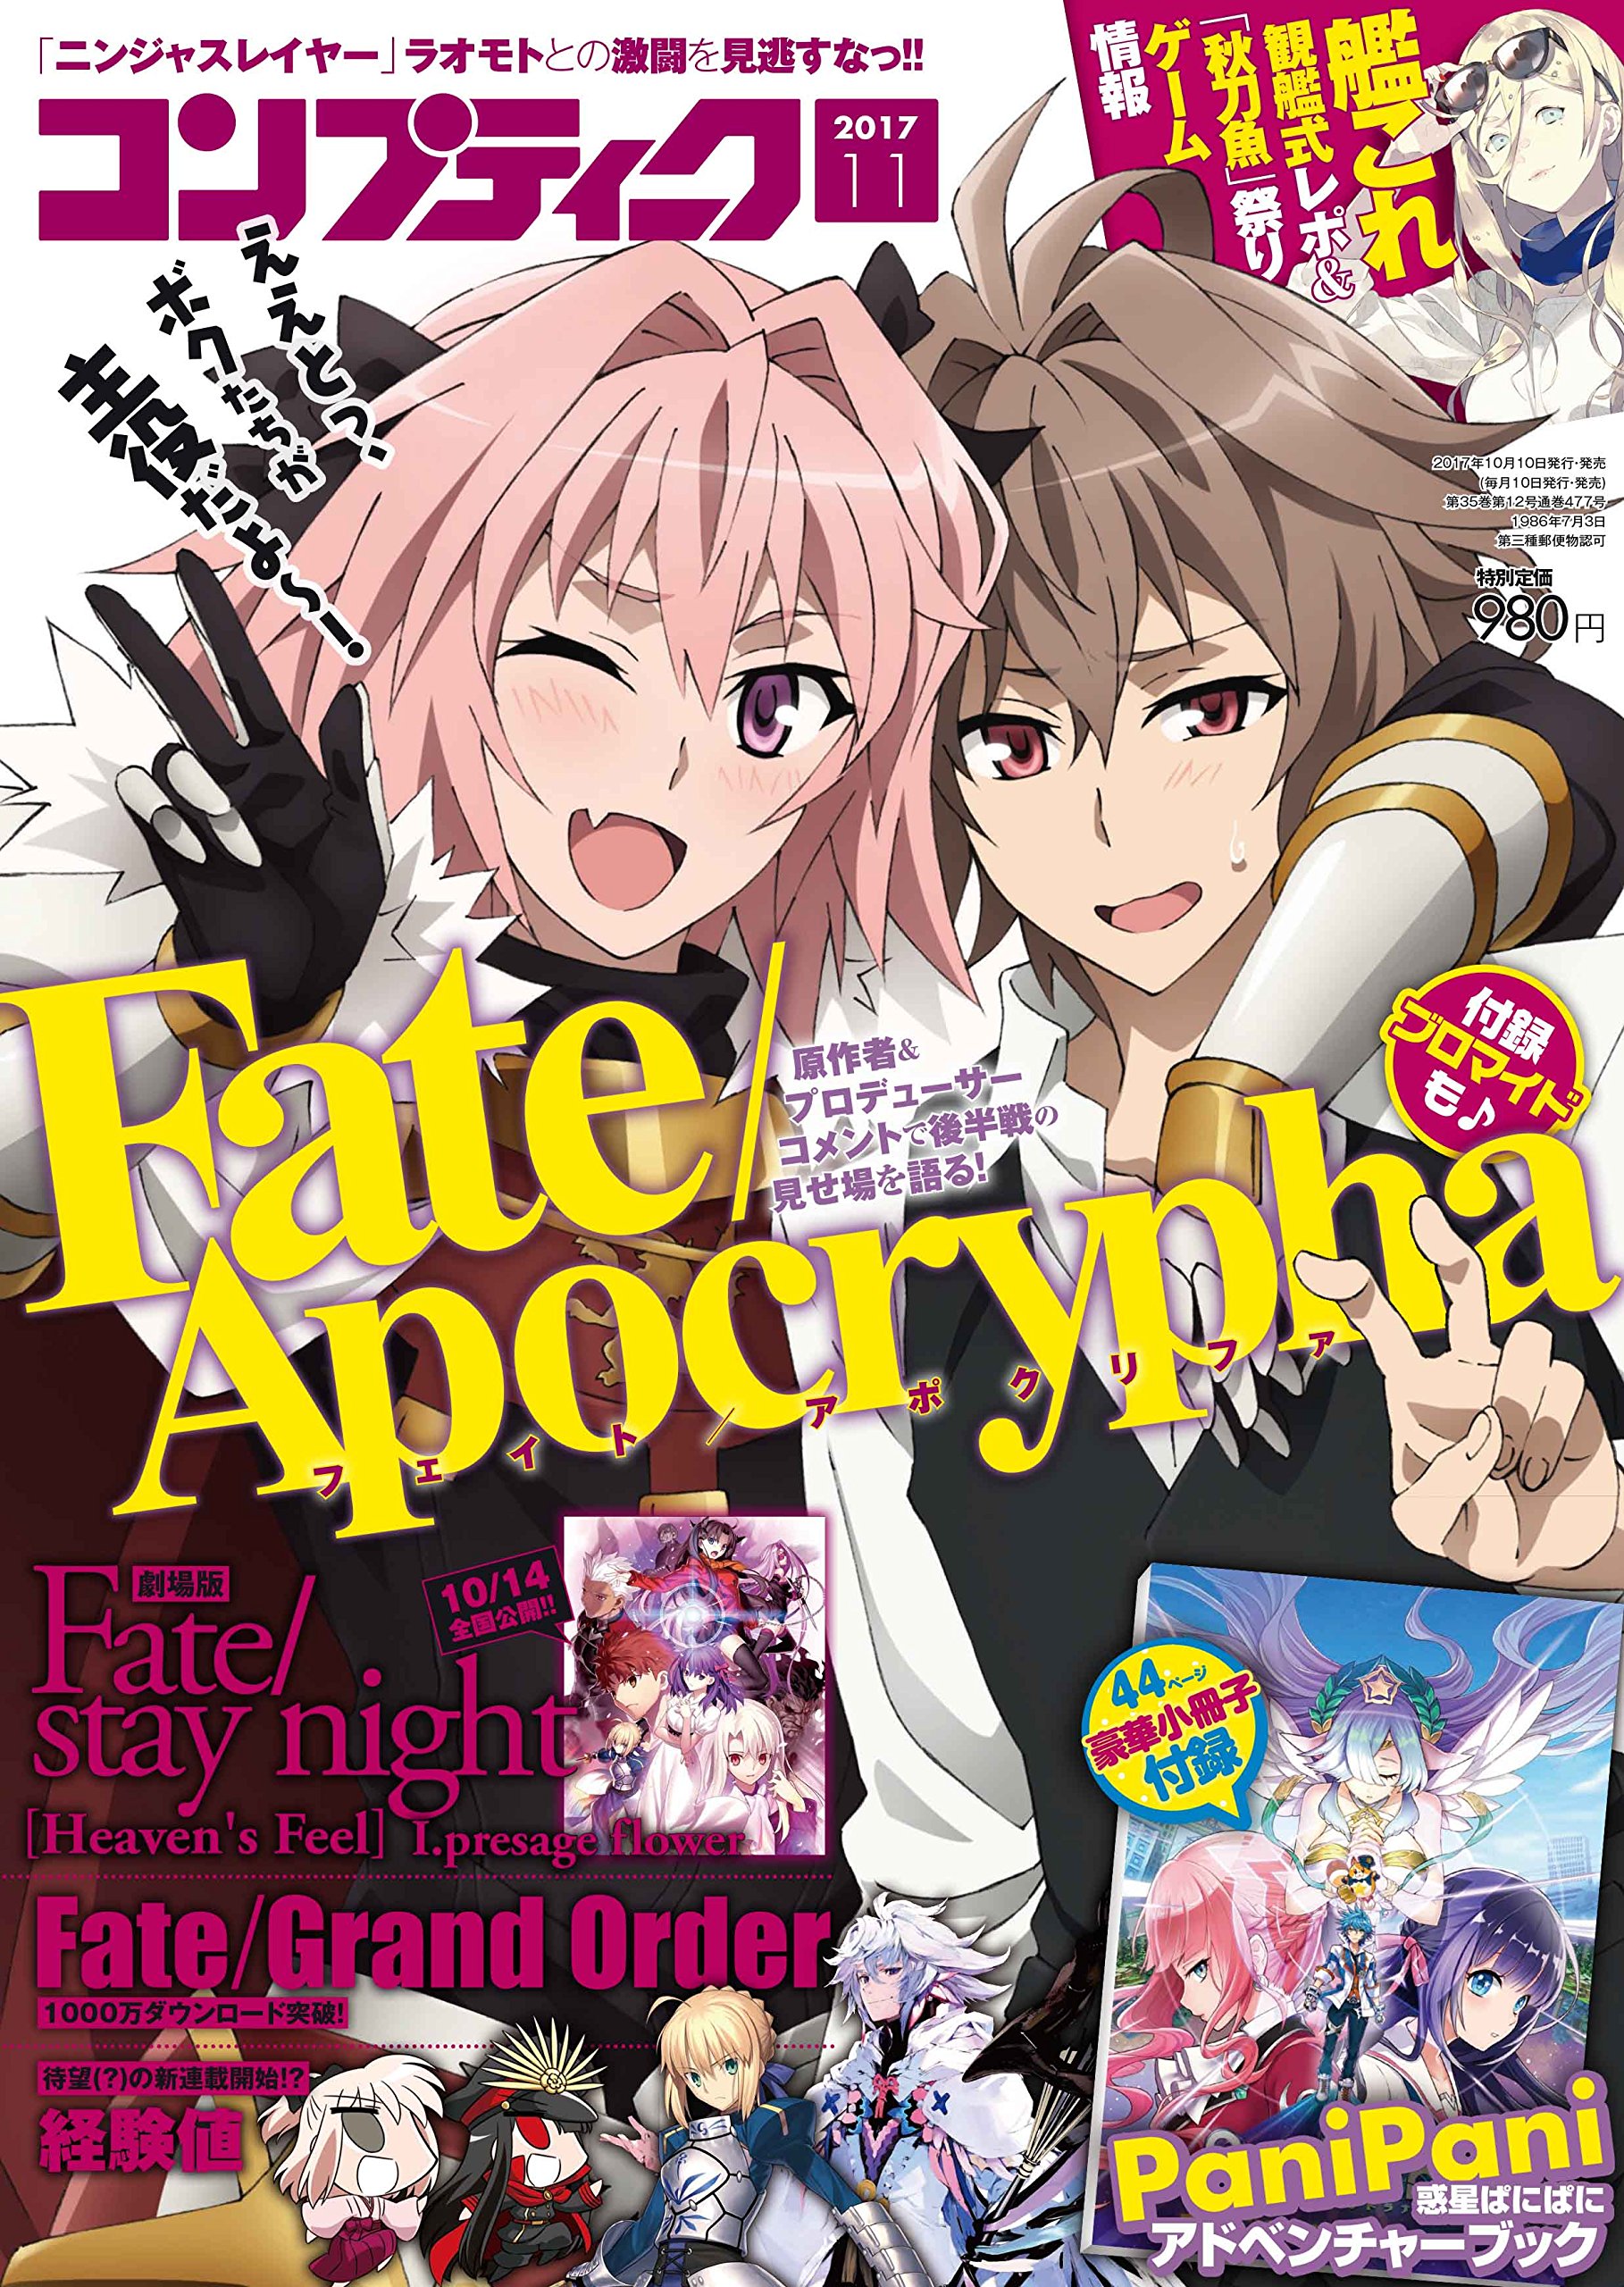 fate apocrypha episode 13 discussion 100 forums myanimelist net fate apocrypha episode 13 discussion